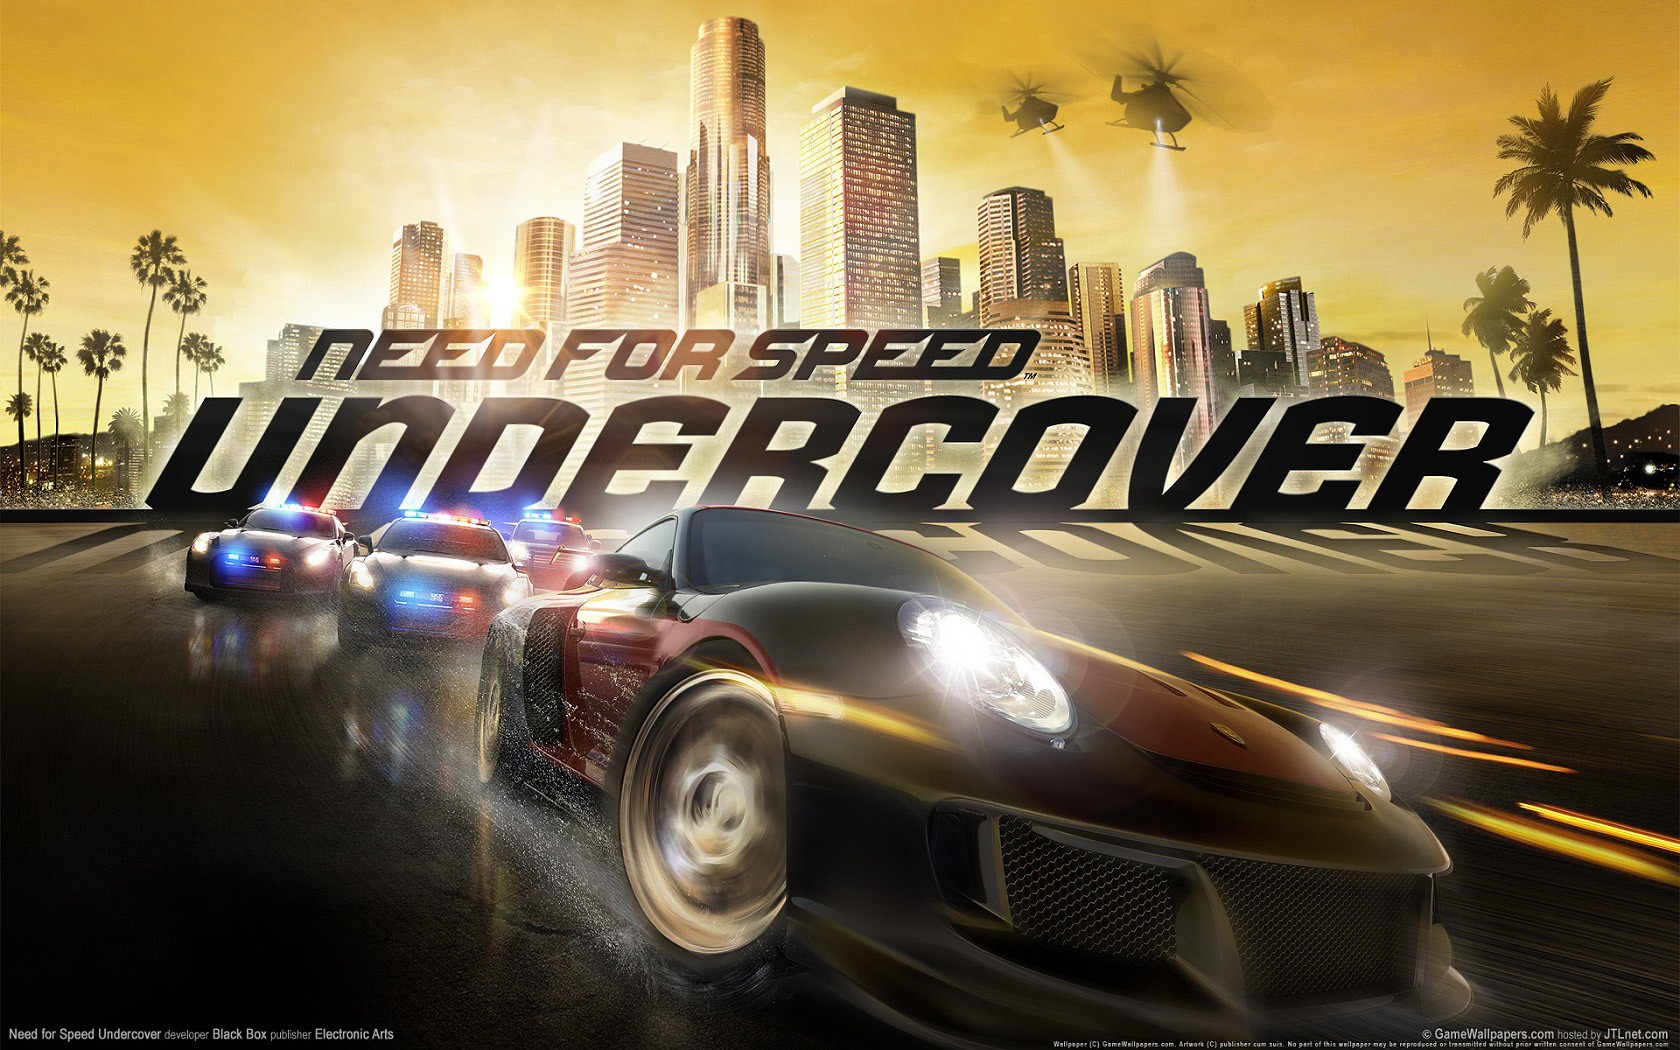 video, Games, Need, For, Speed, Need, For, Speed, Undercover, Games, Pc, Games Wallpaper